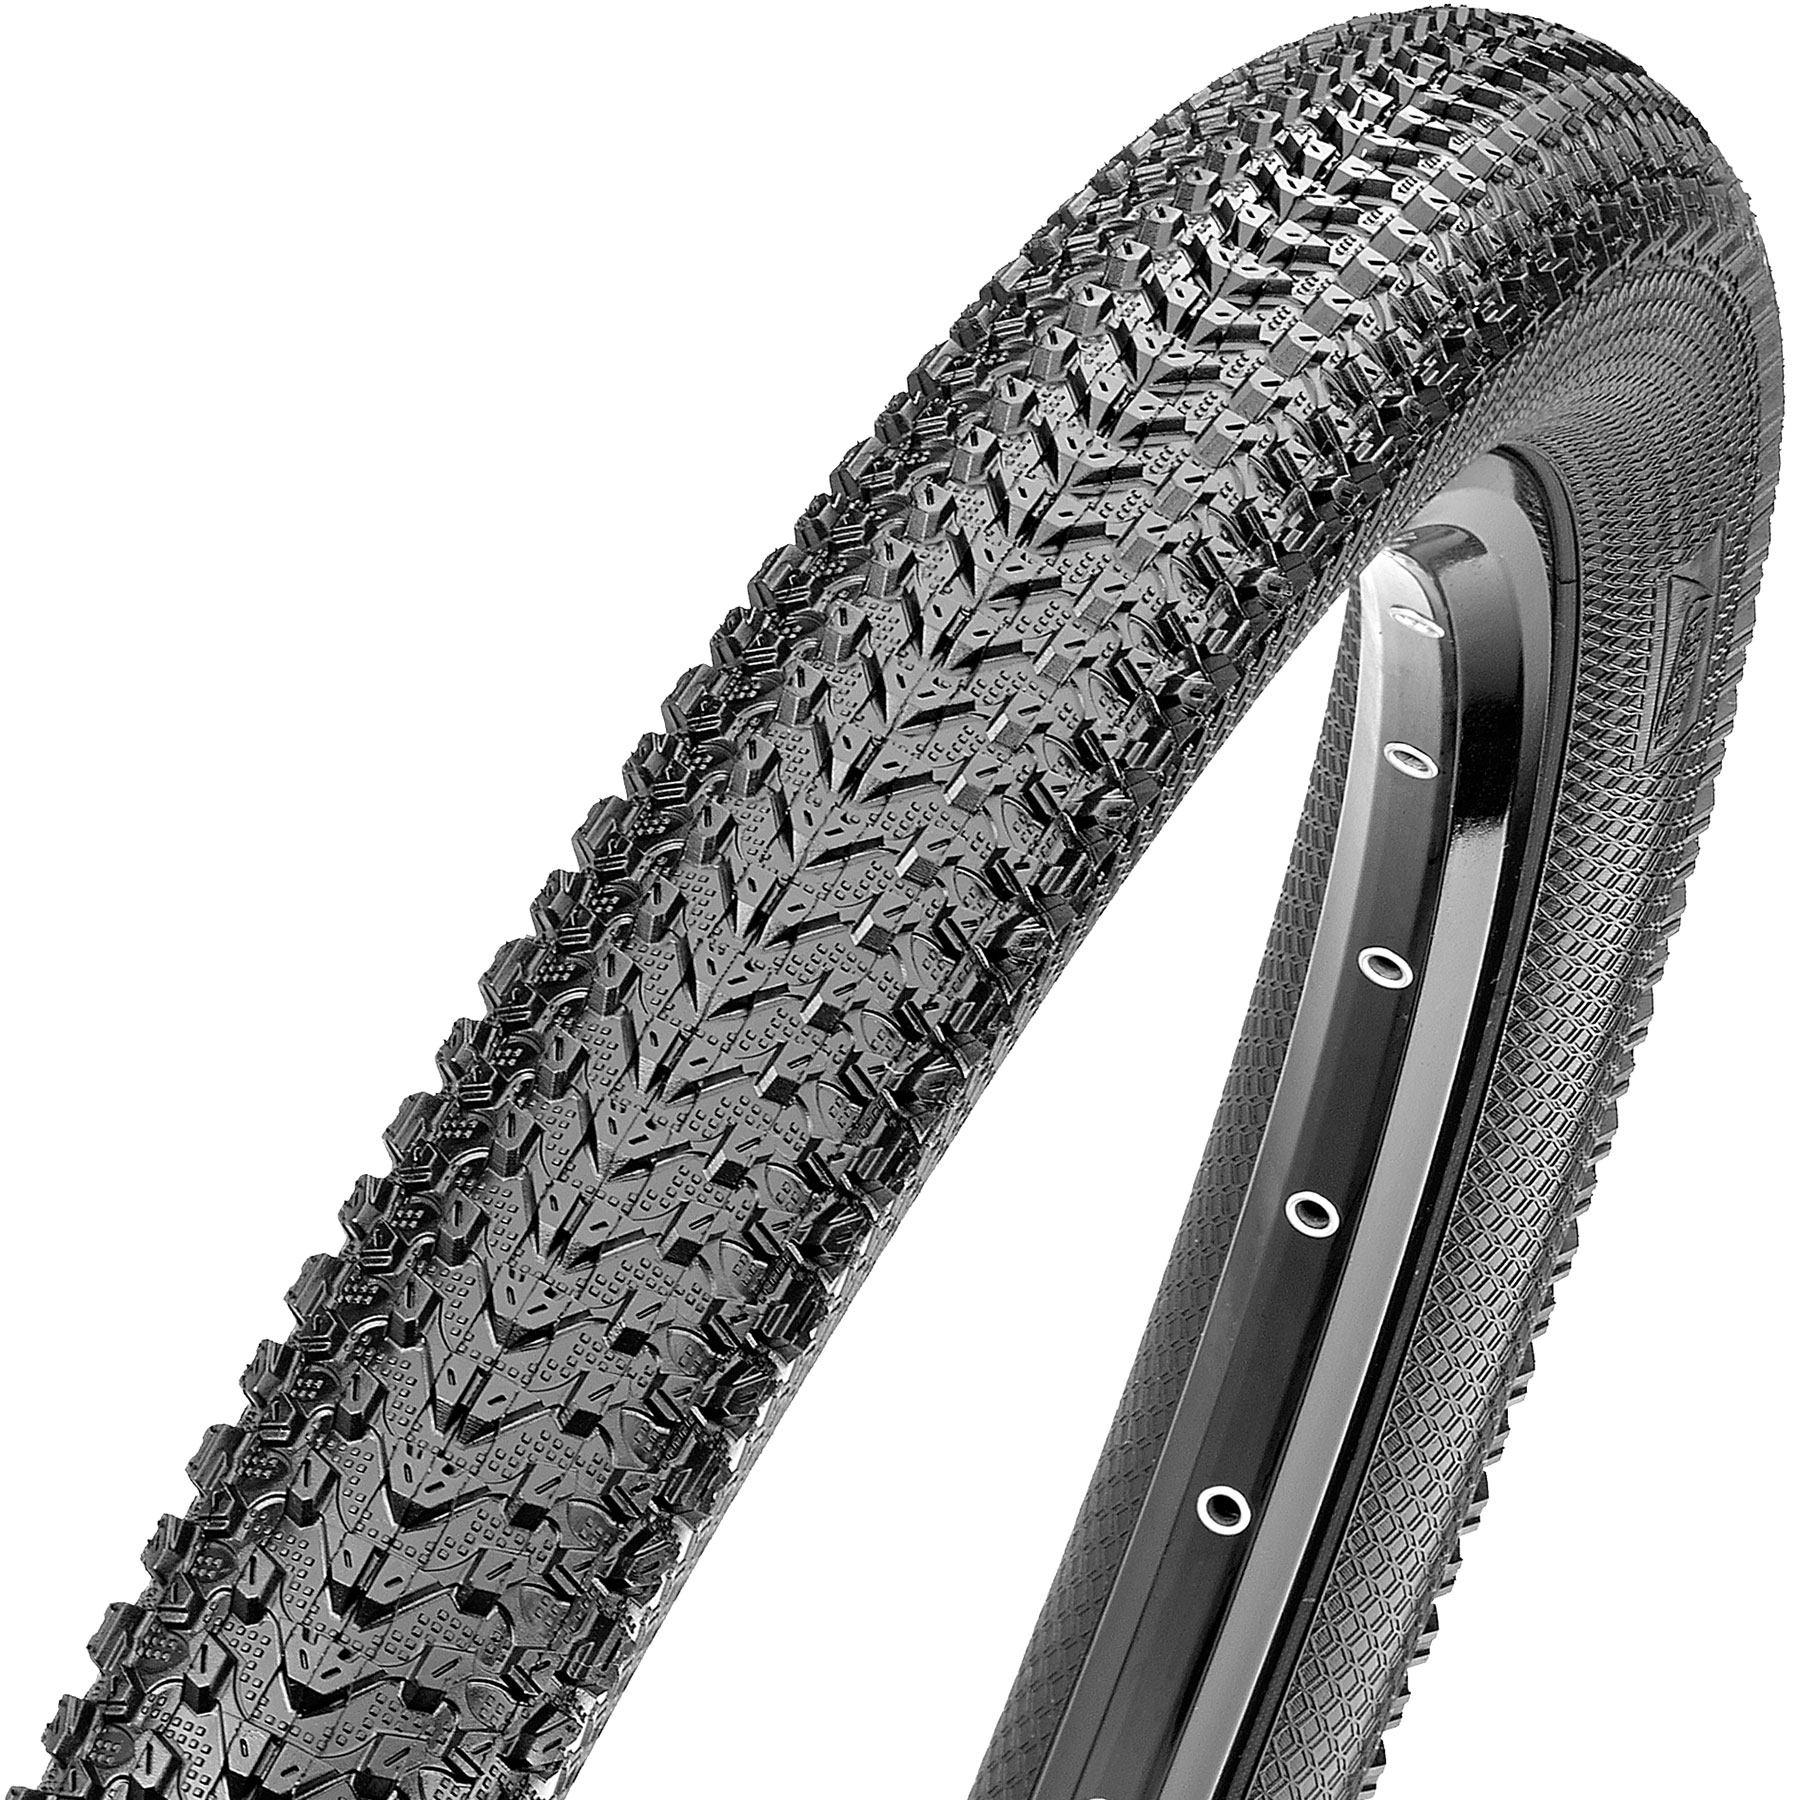 2 X MAXXIS PACE MTB bicycle tire 26 X 2.1 Superlight bicycle MTB tyres 